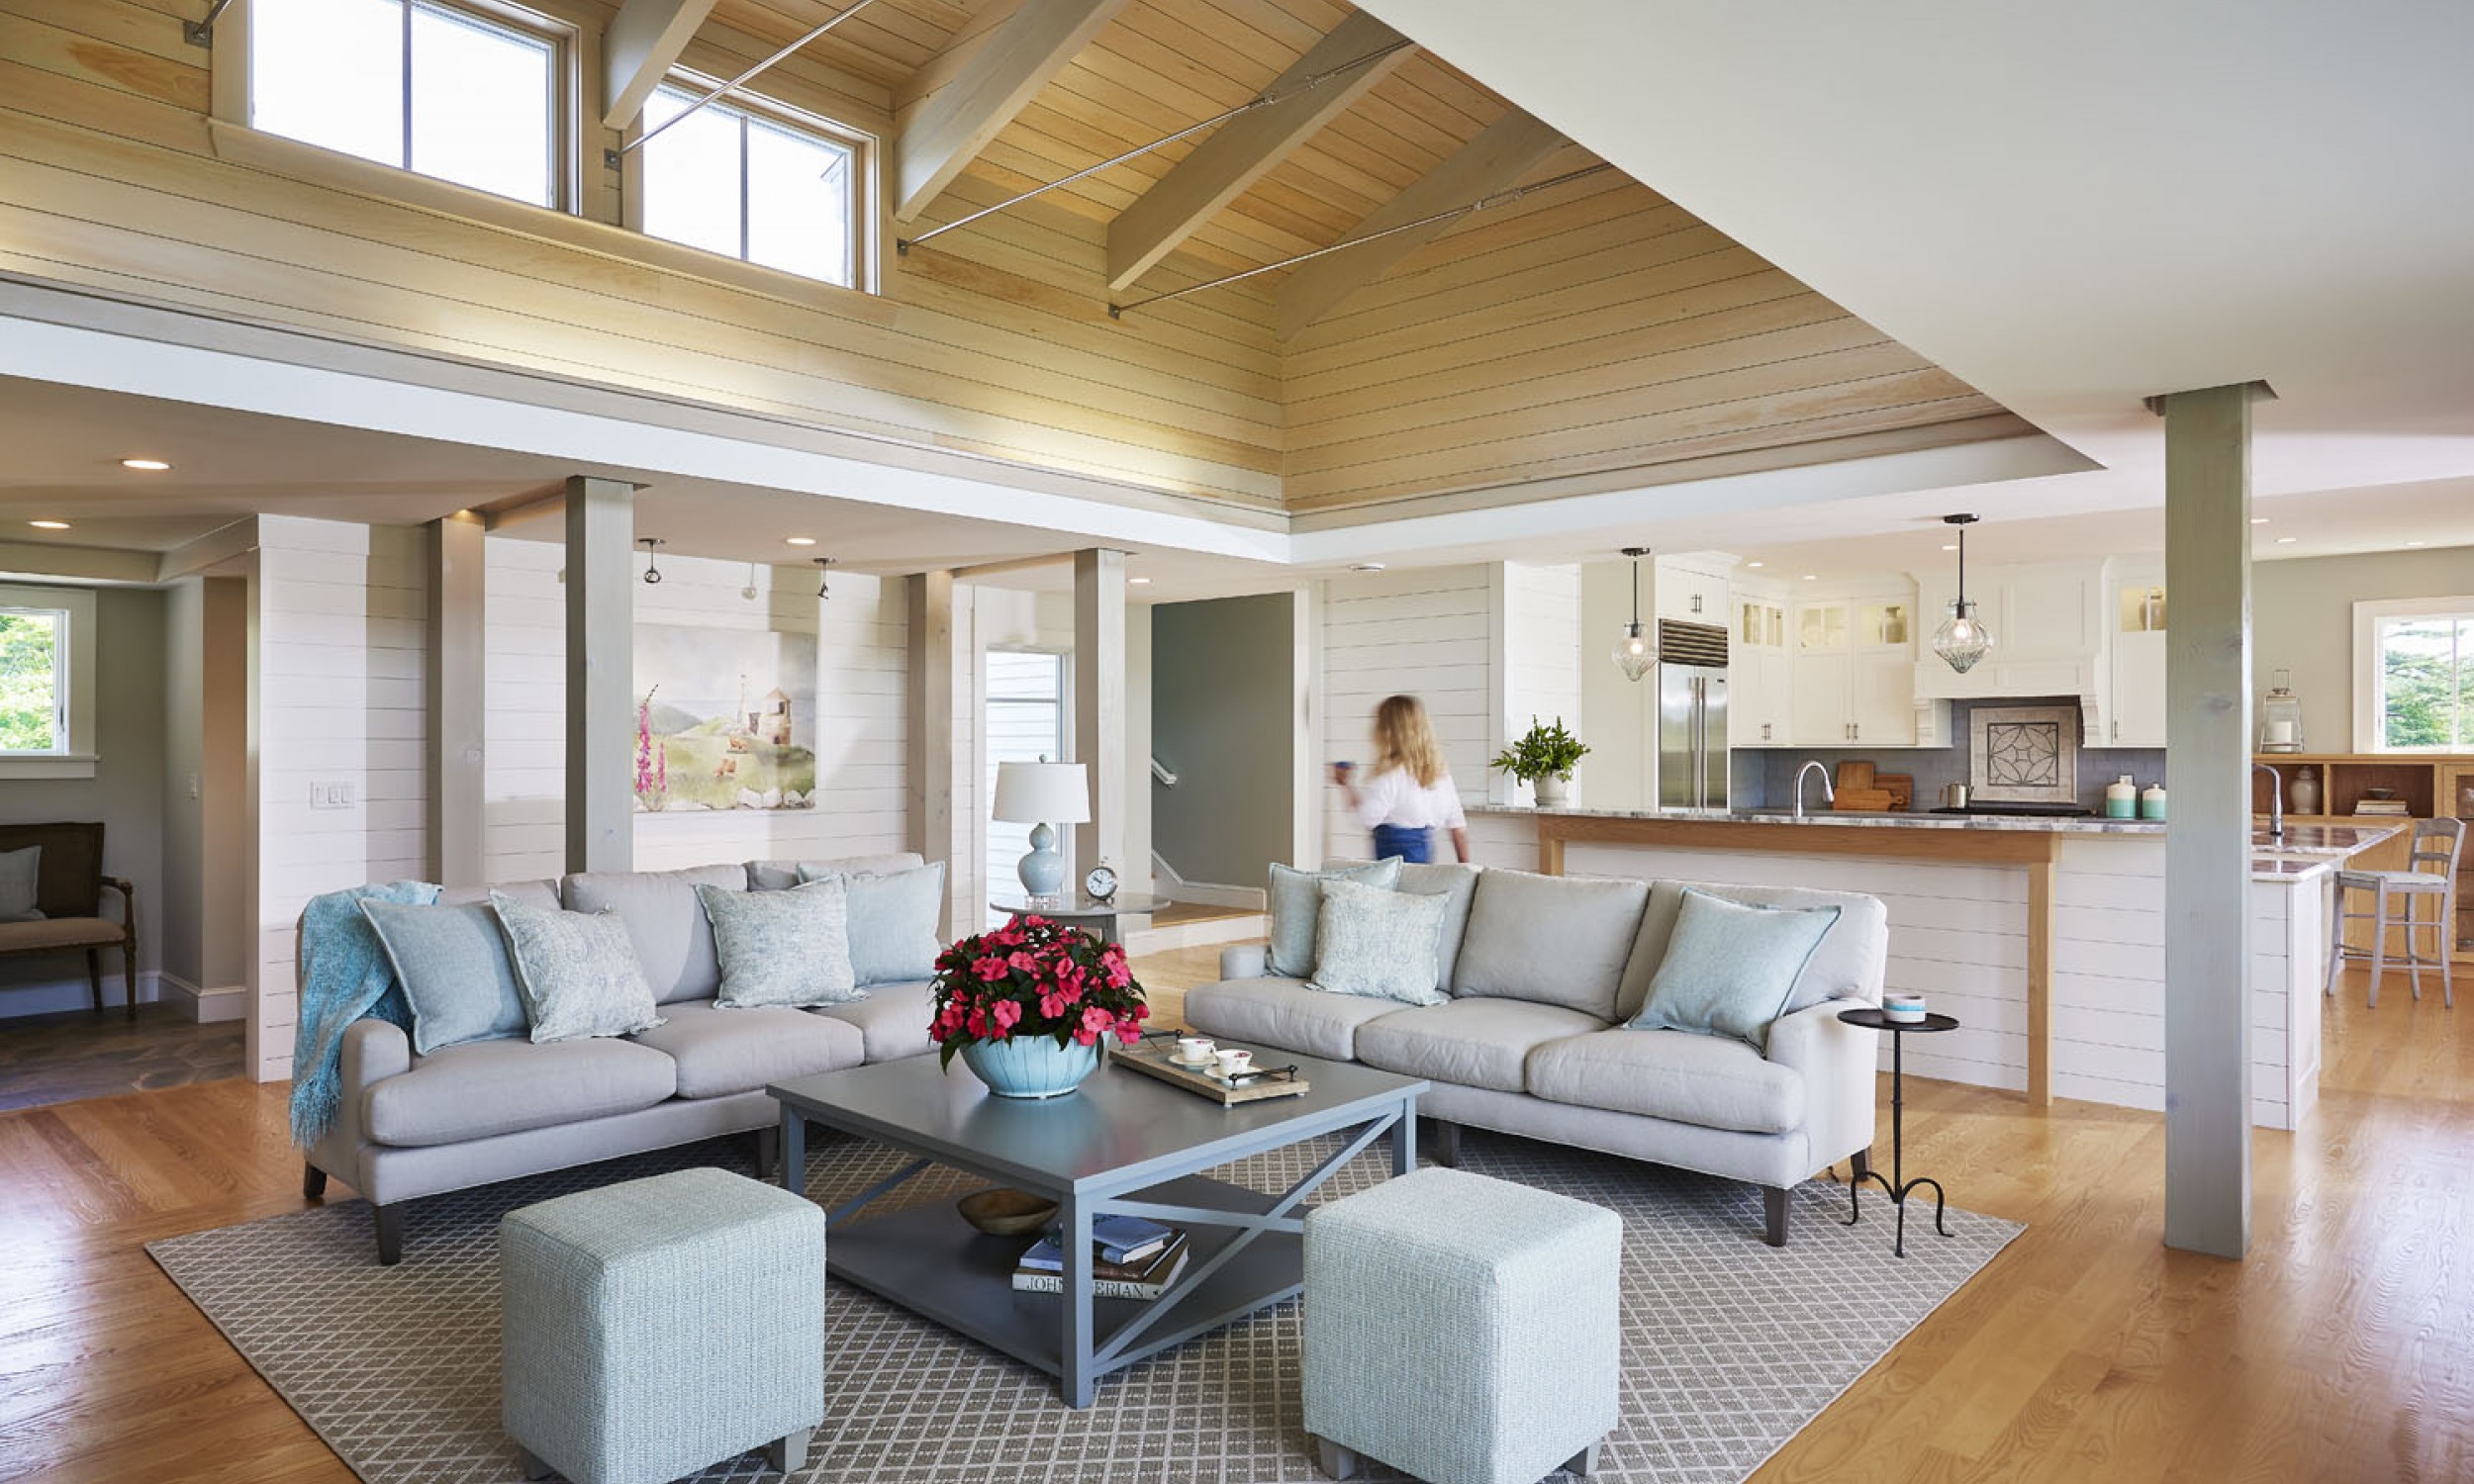 Living Room, wood ceiling, cathedral ceiling, uplighting, clerestory windows, Maine Architect